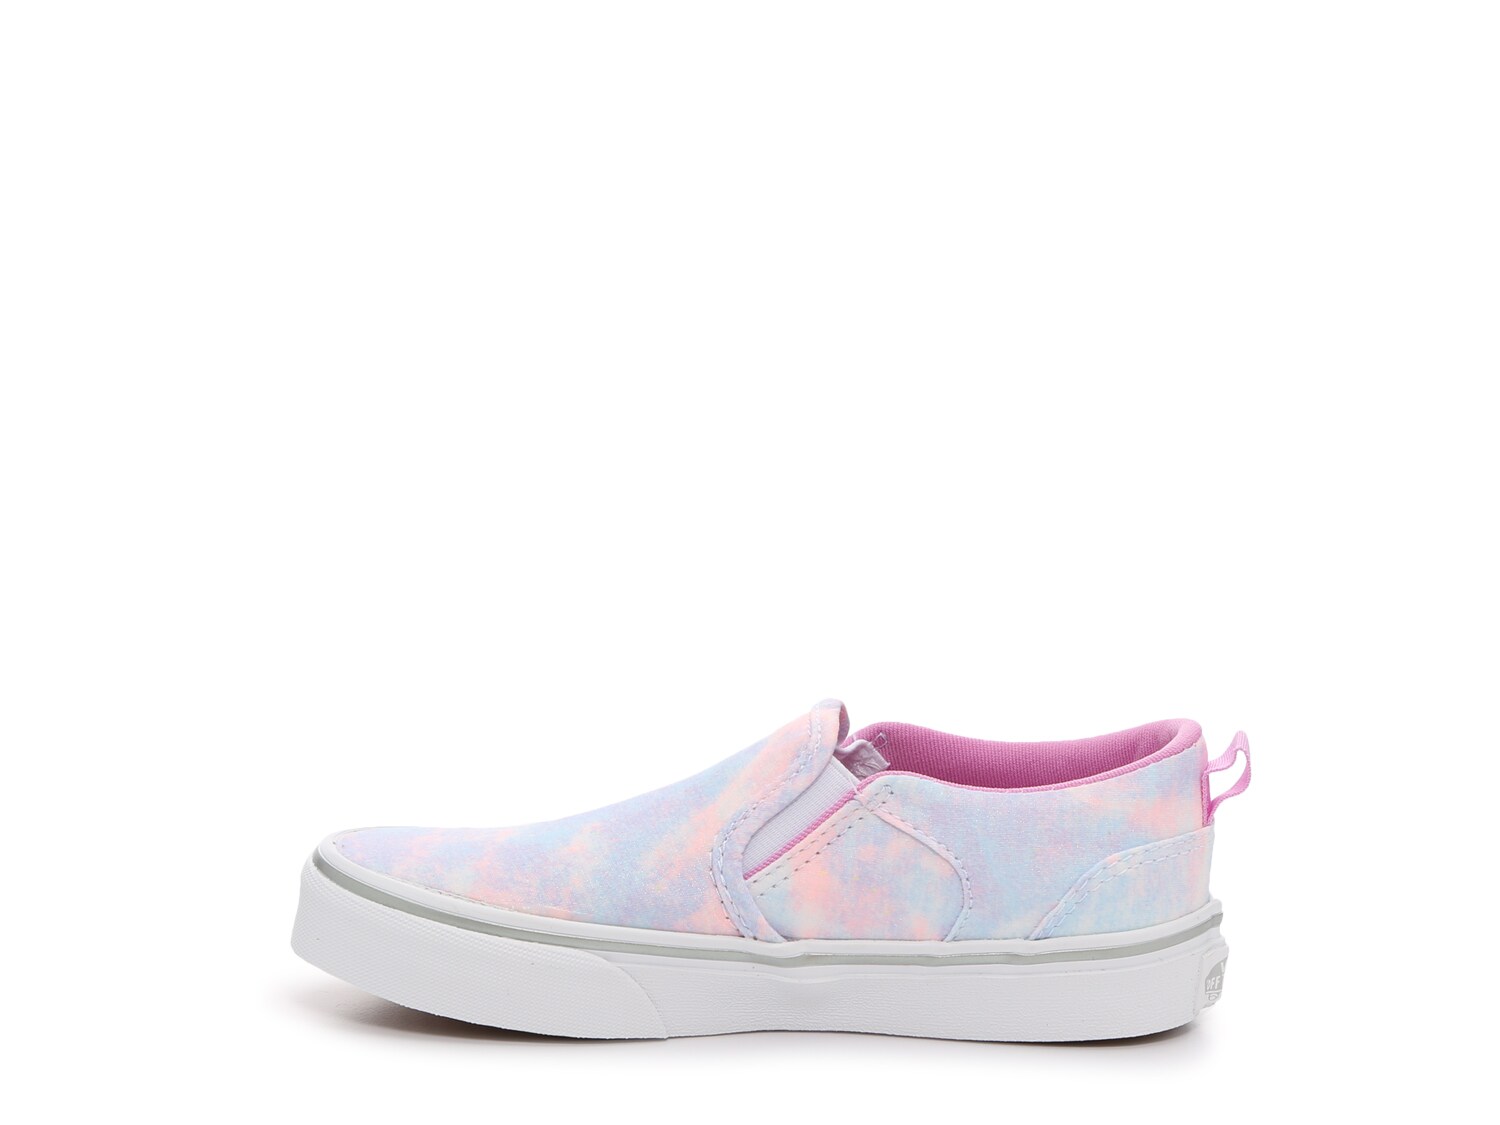 vans asher youth